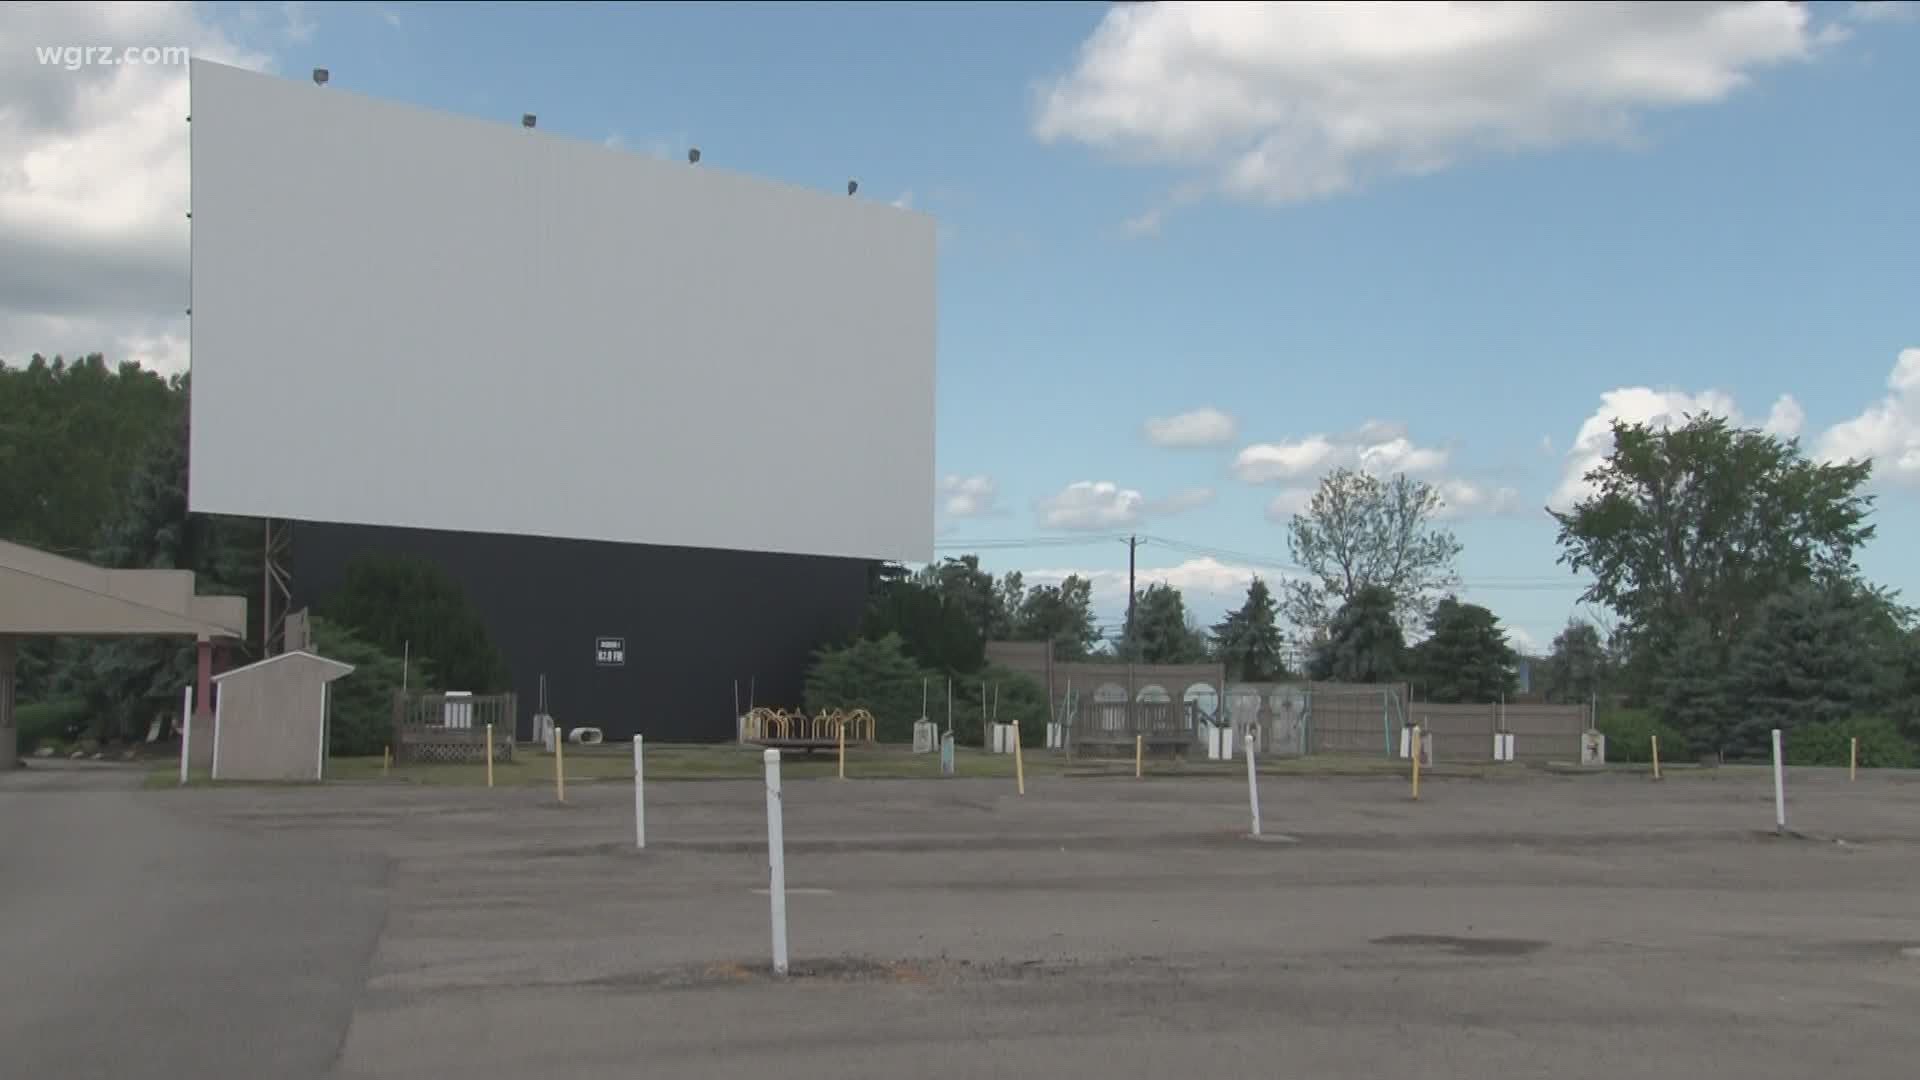 Transit drive-in booked with events